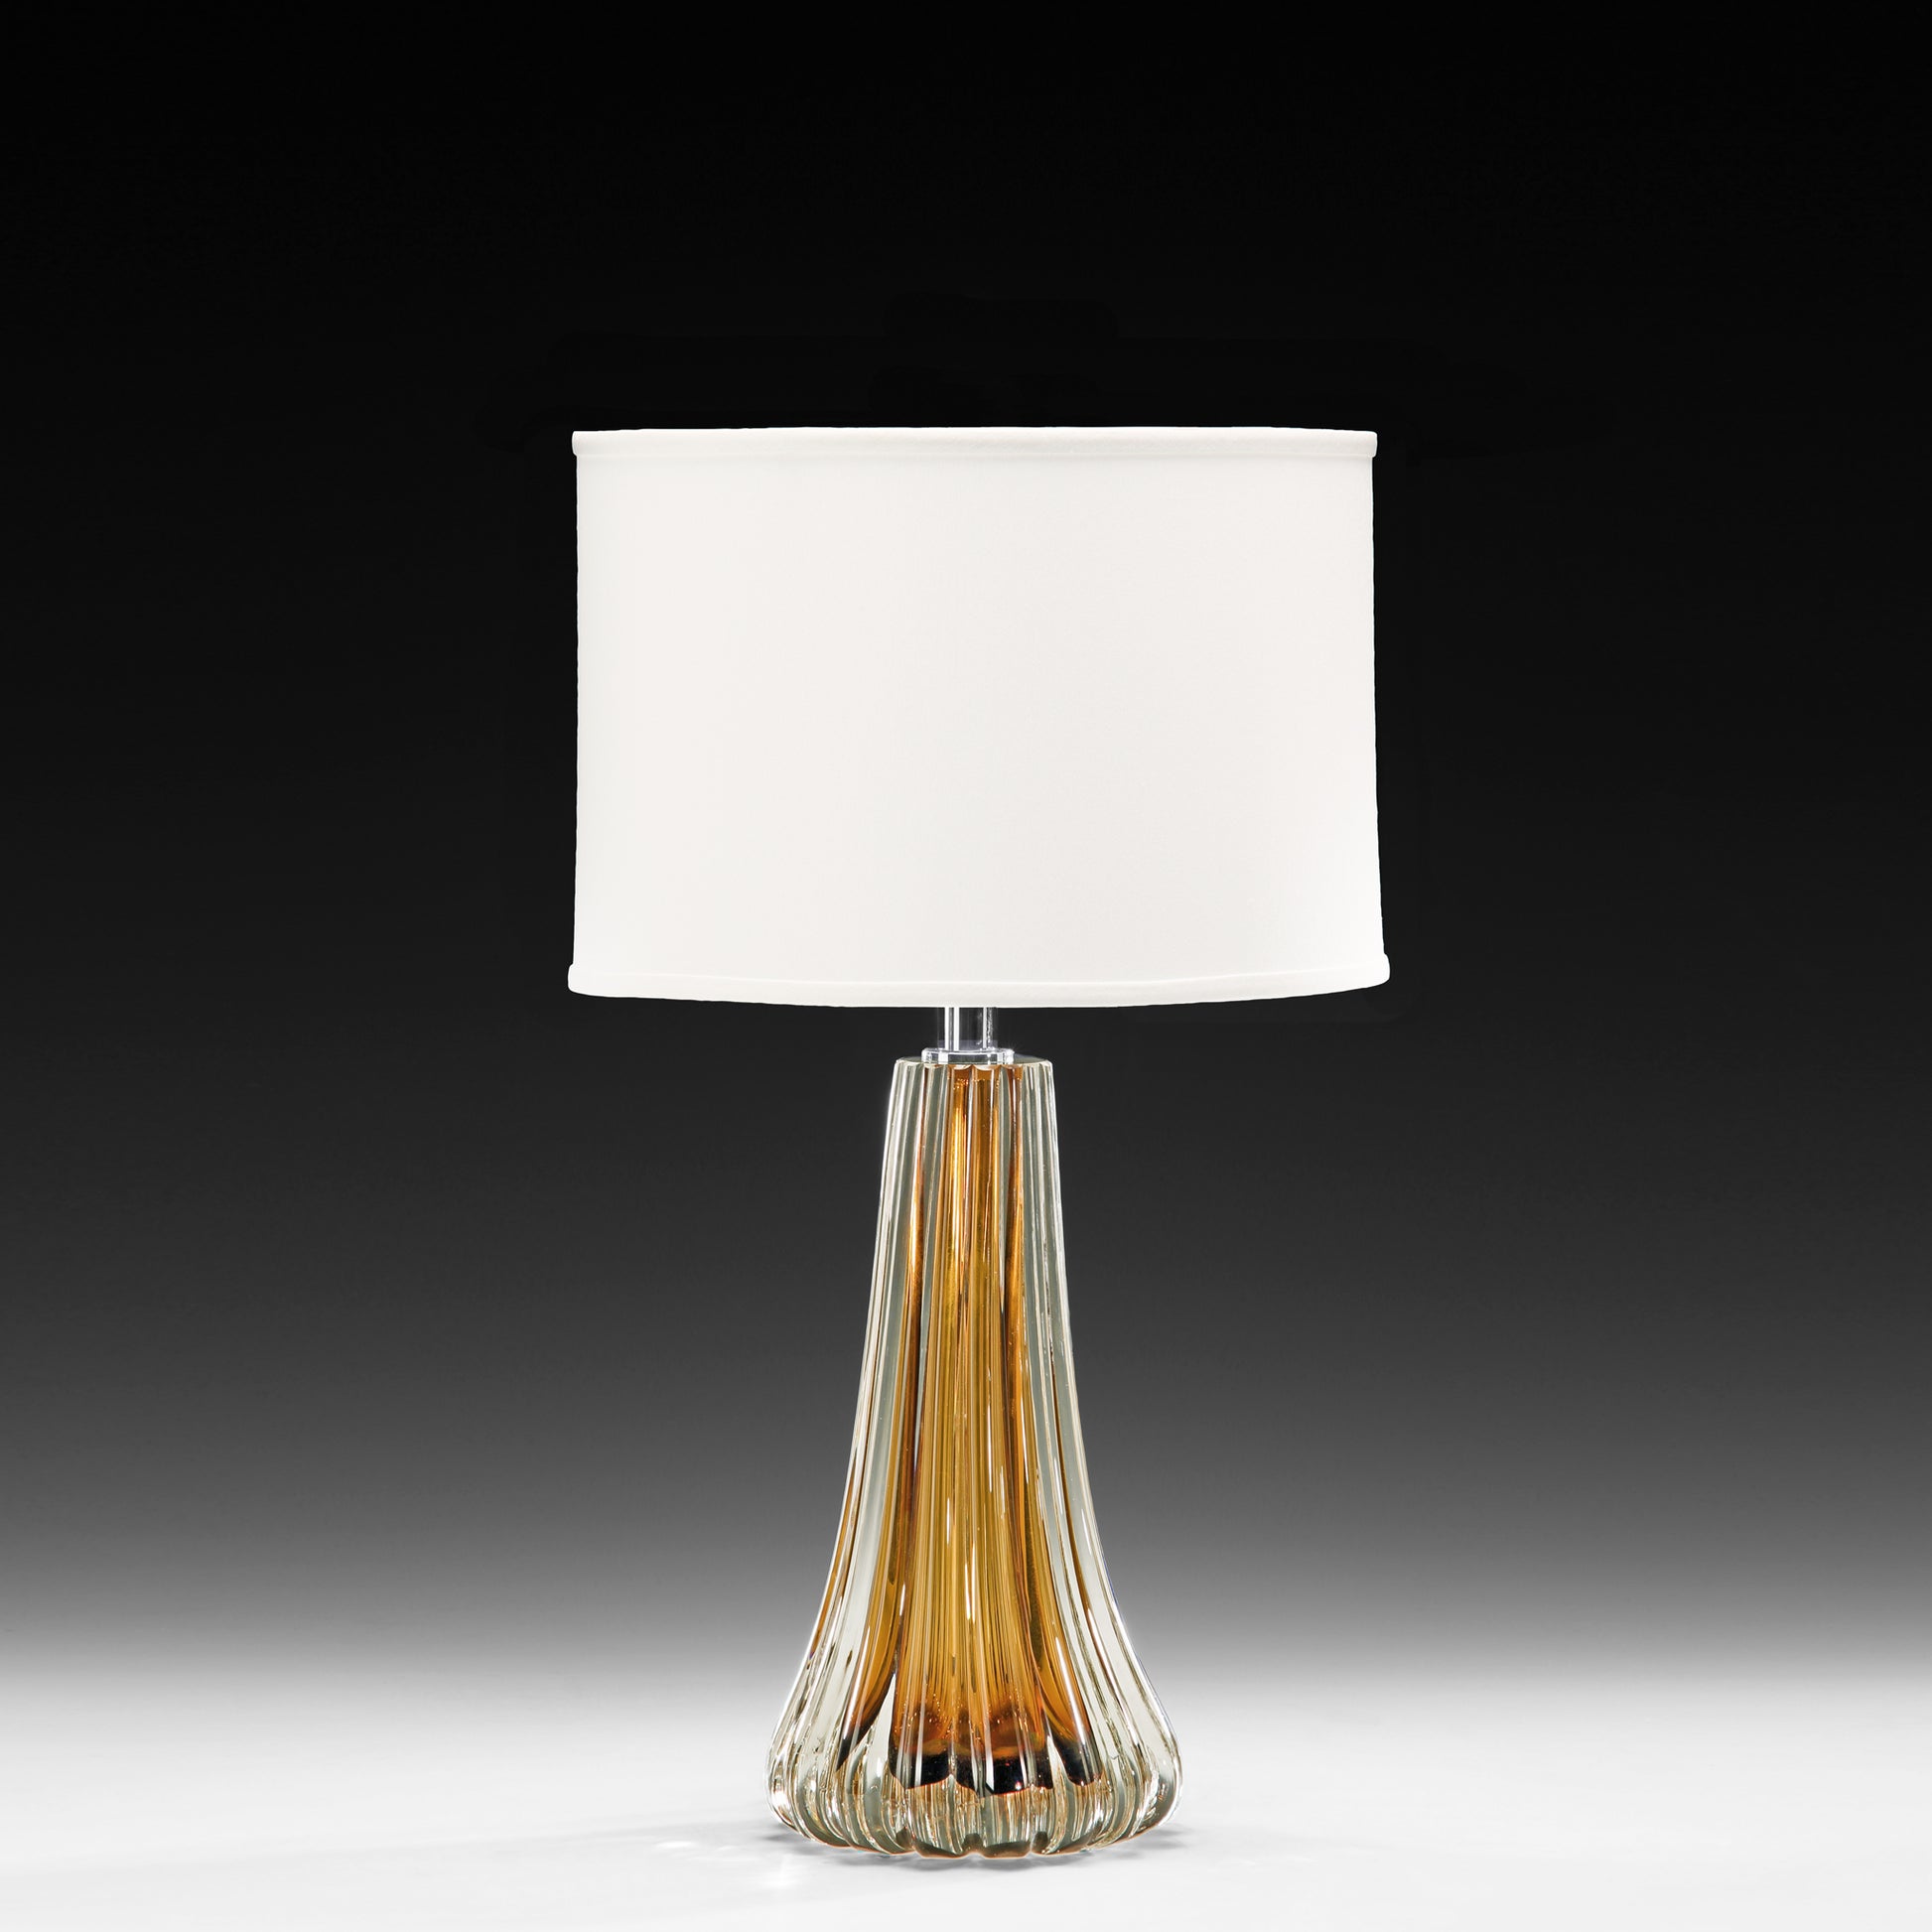 Amber Venetian glass table lamp with polished nickel accent.